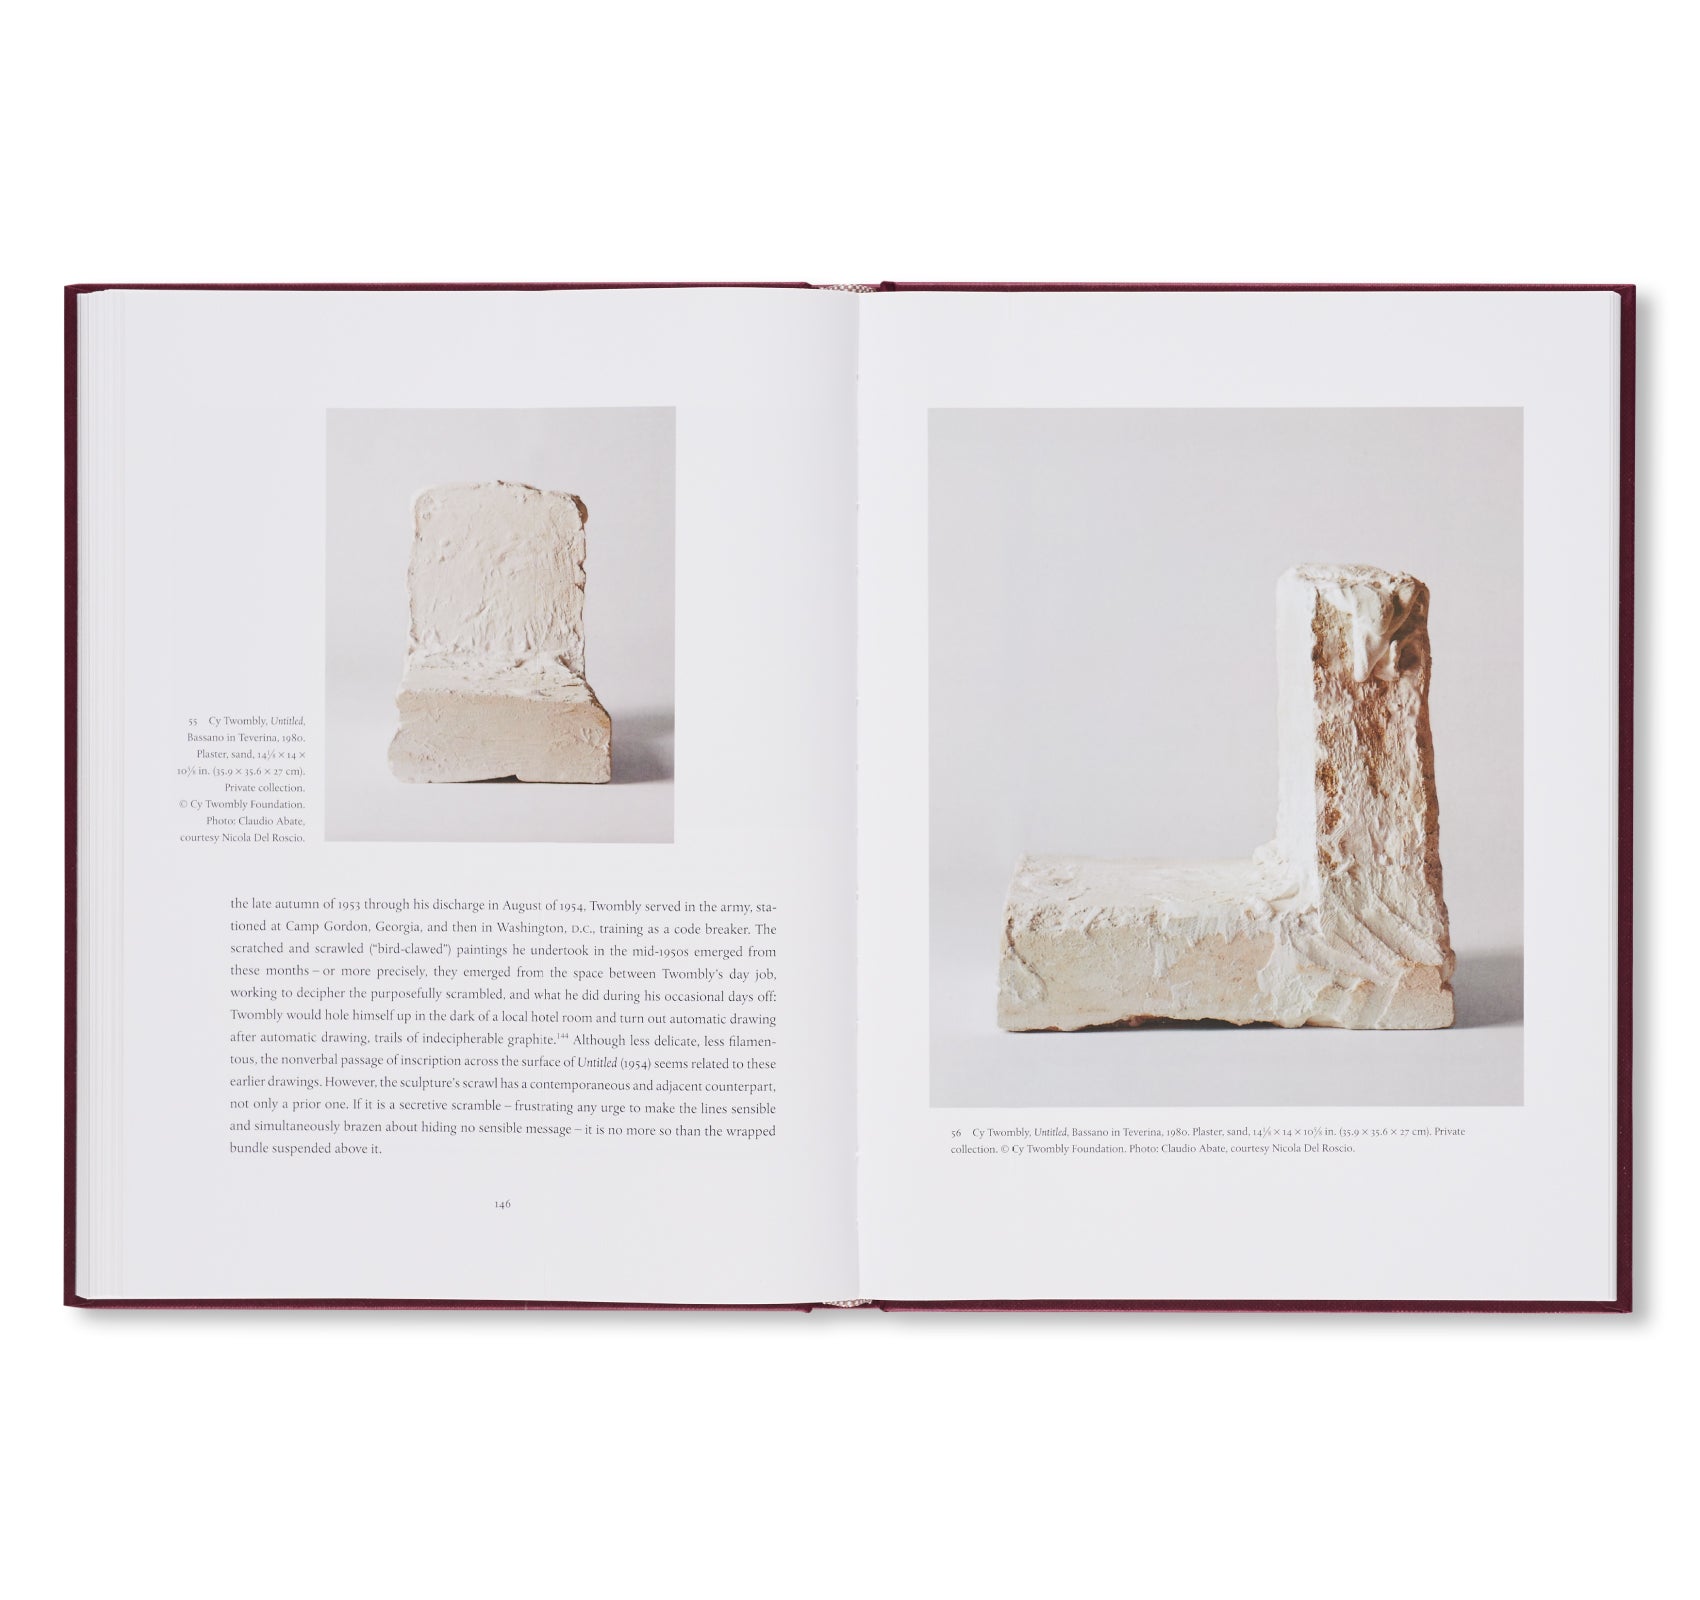 CY TWOMBLY’S THINGS by Kate Nesin